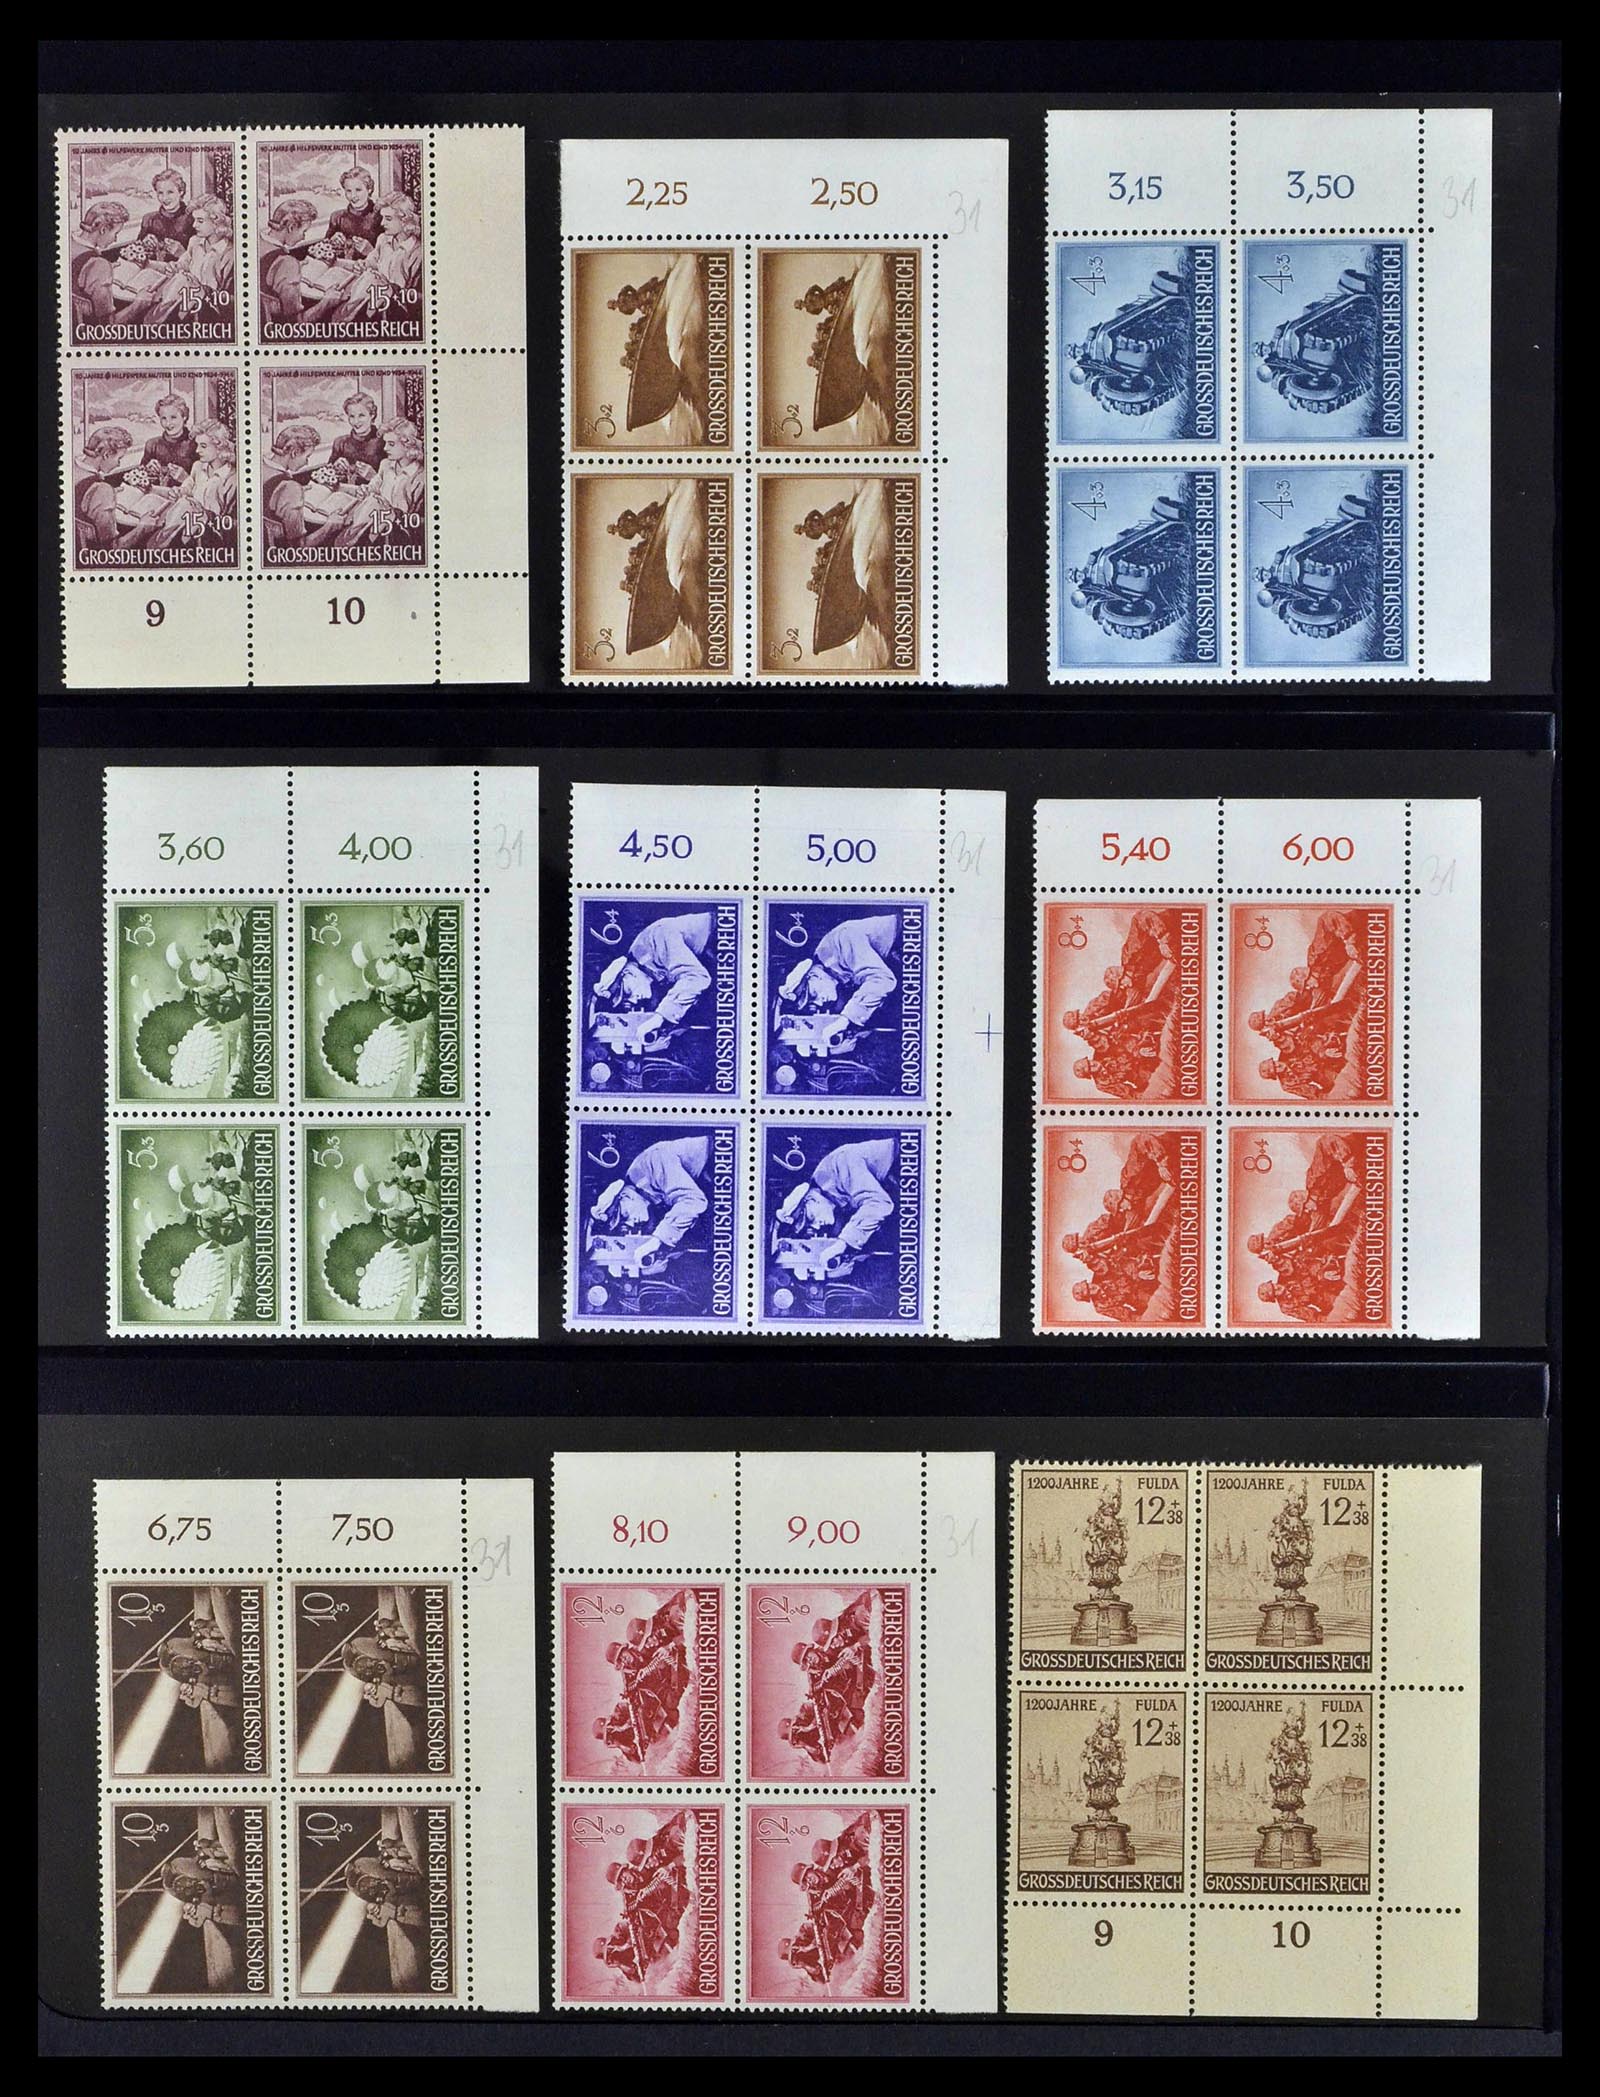 39255 0028 - Stamp collection 39255 German Reich MNH blocks of 4.